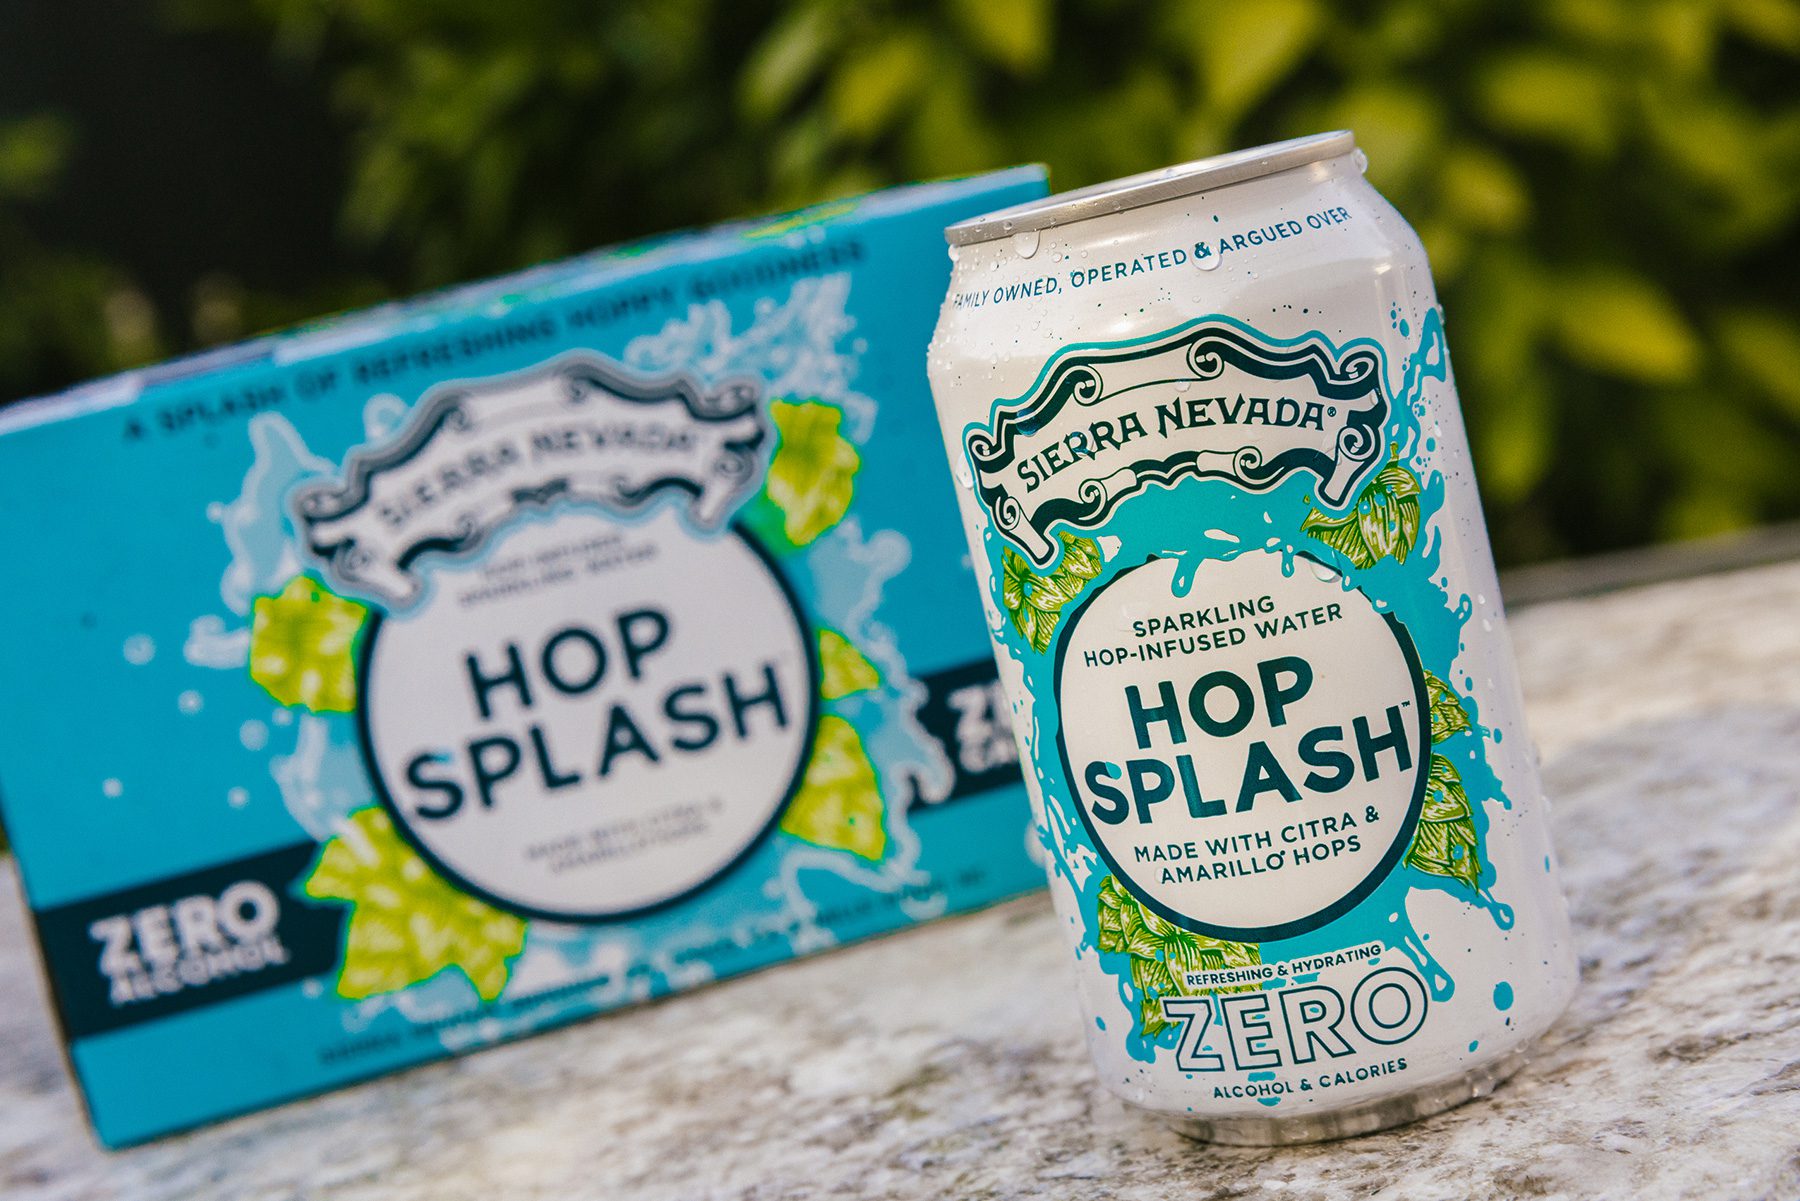 A can and six-pack of Sierra Nevada Hop Splash sparkling water